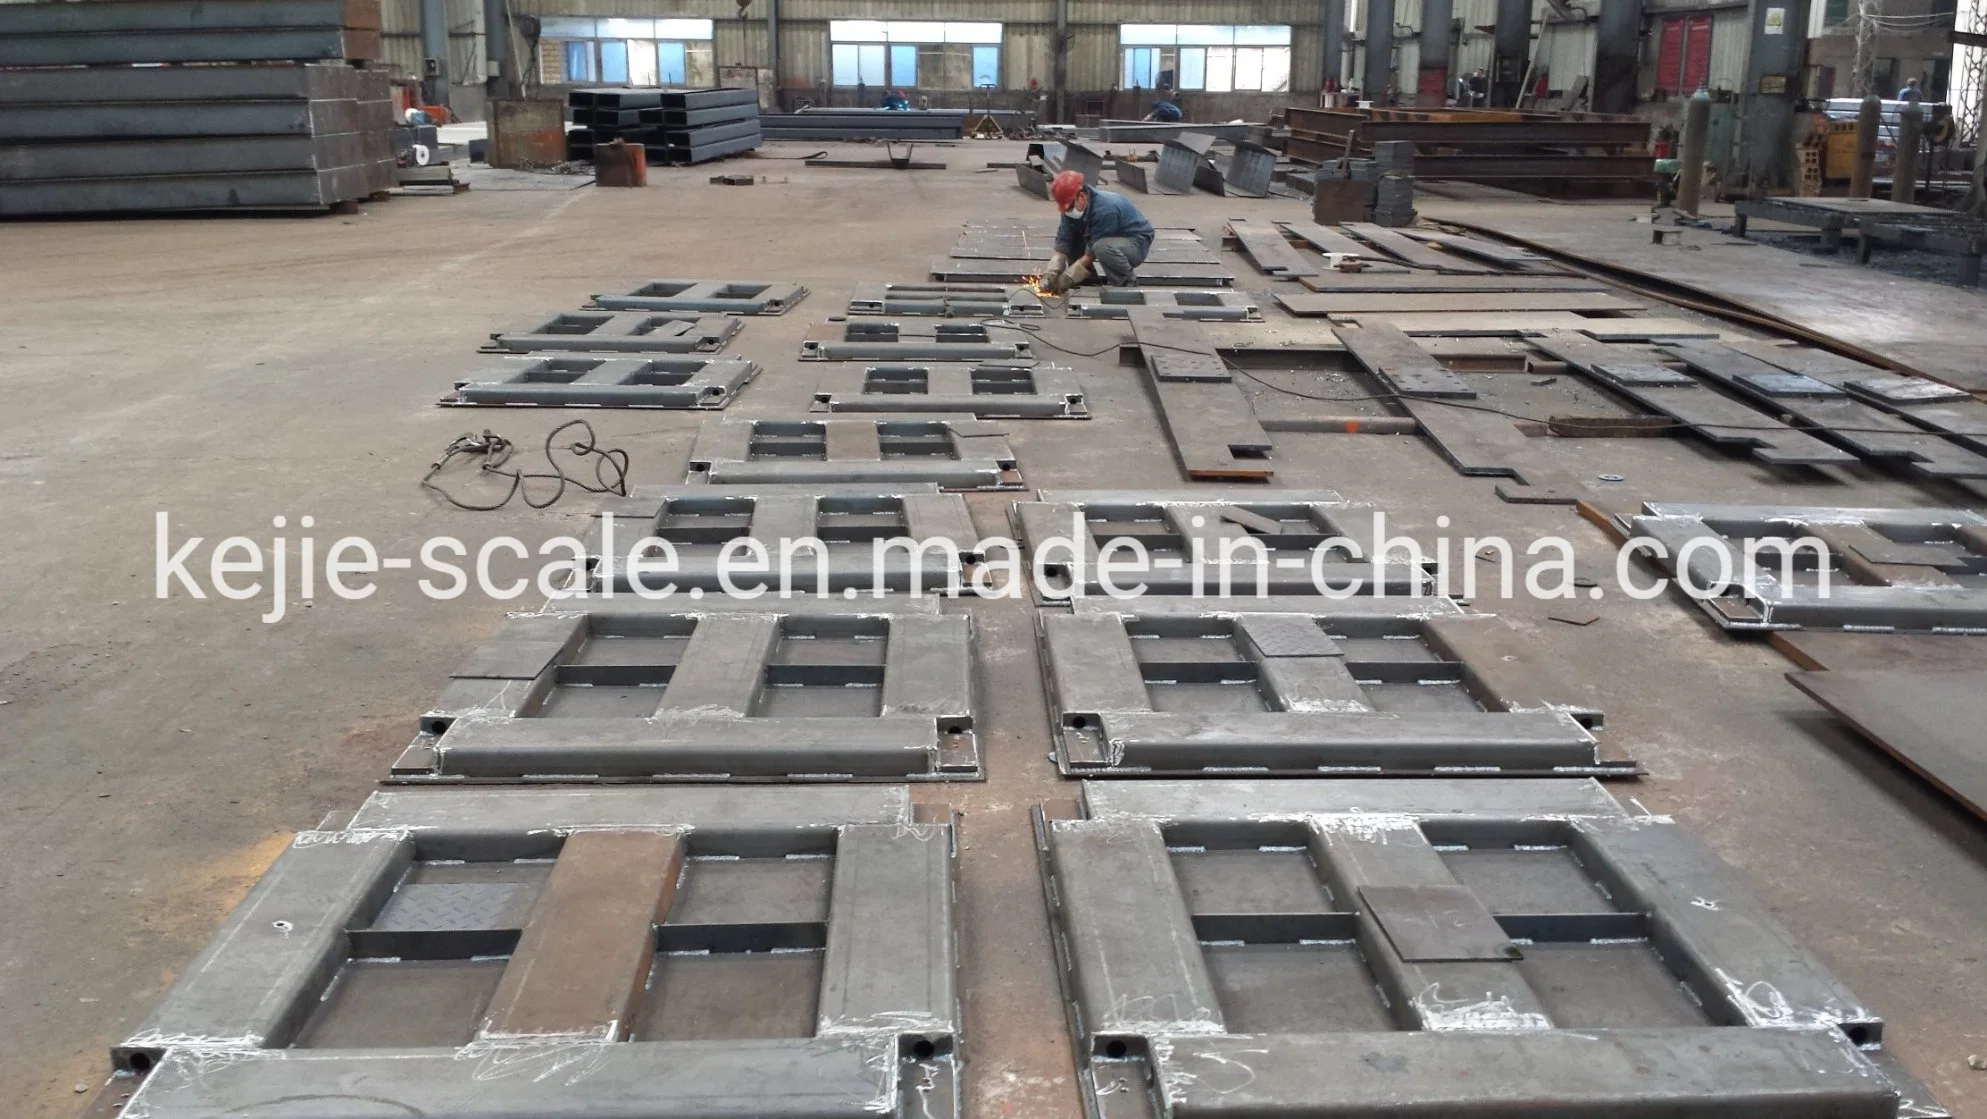 1t, 2t, 3t, 5t PT Steel Electronic Floor Scale From China Kejie Weighing Factory for Export